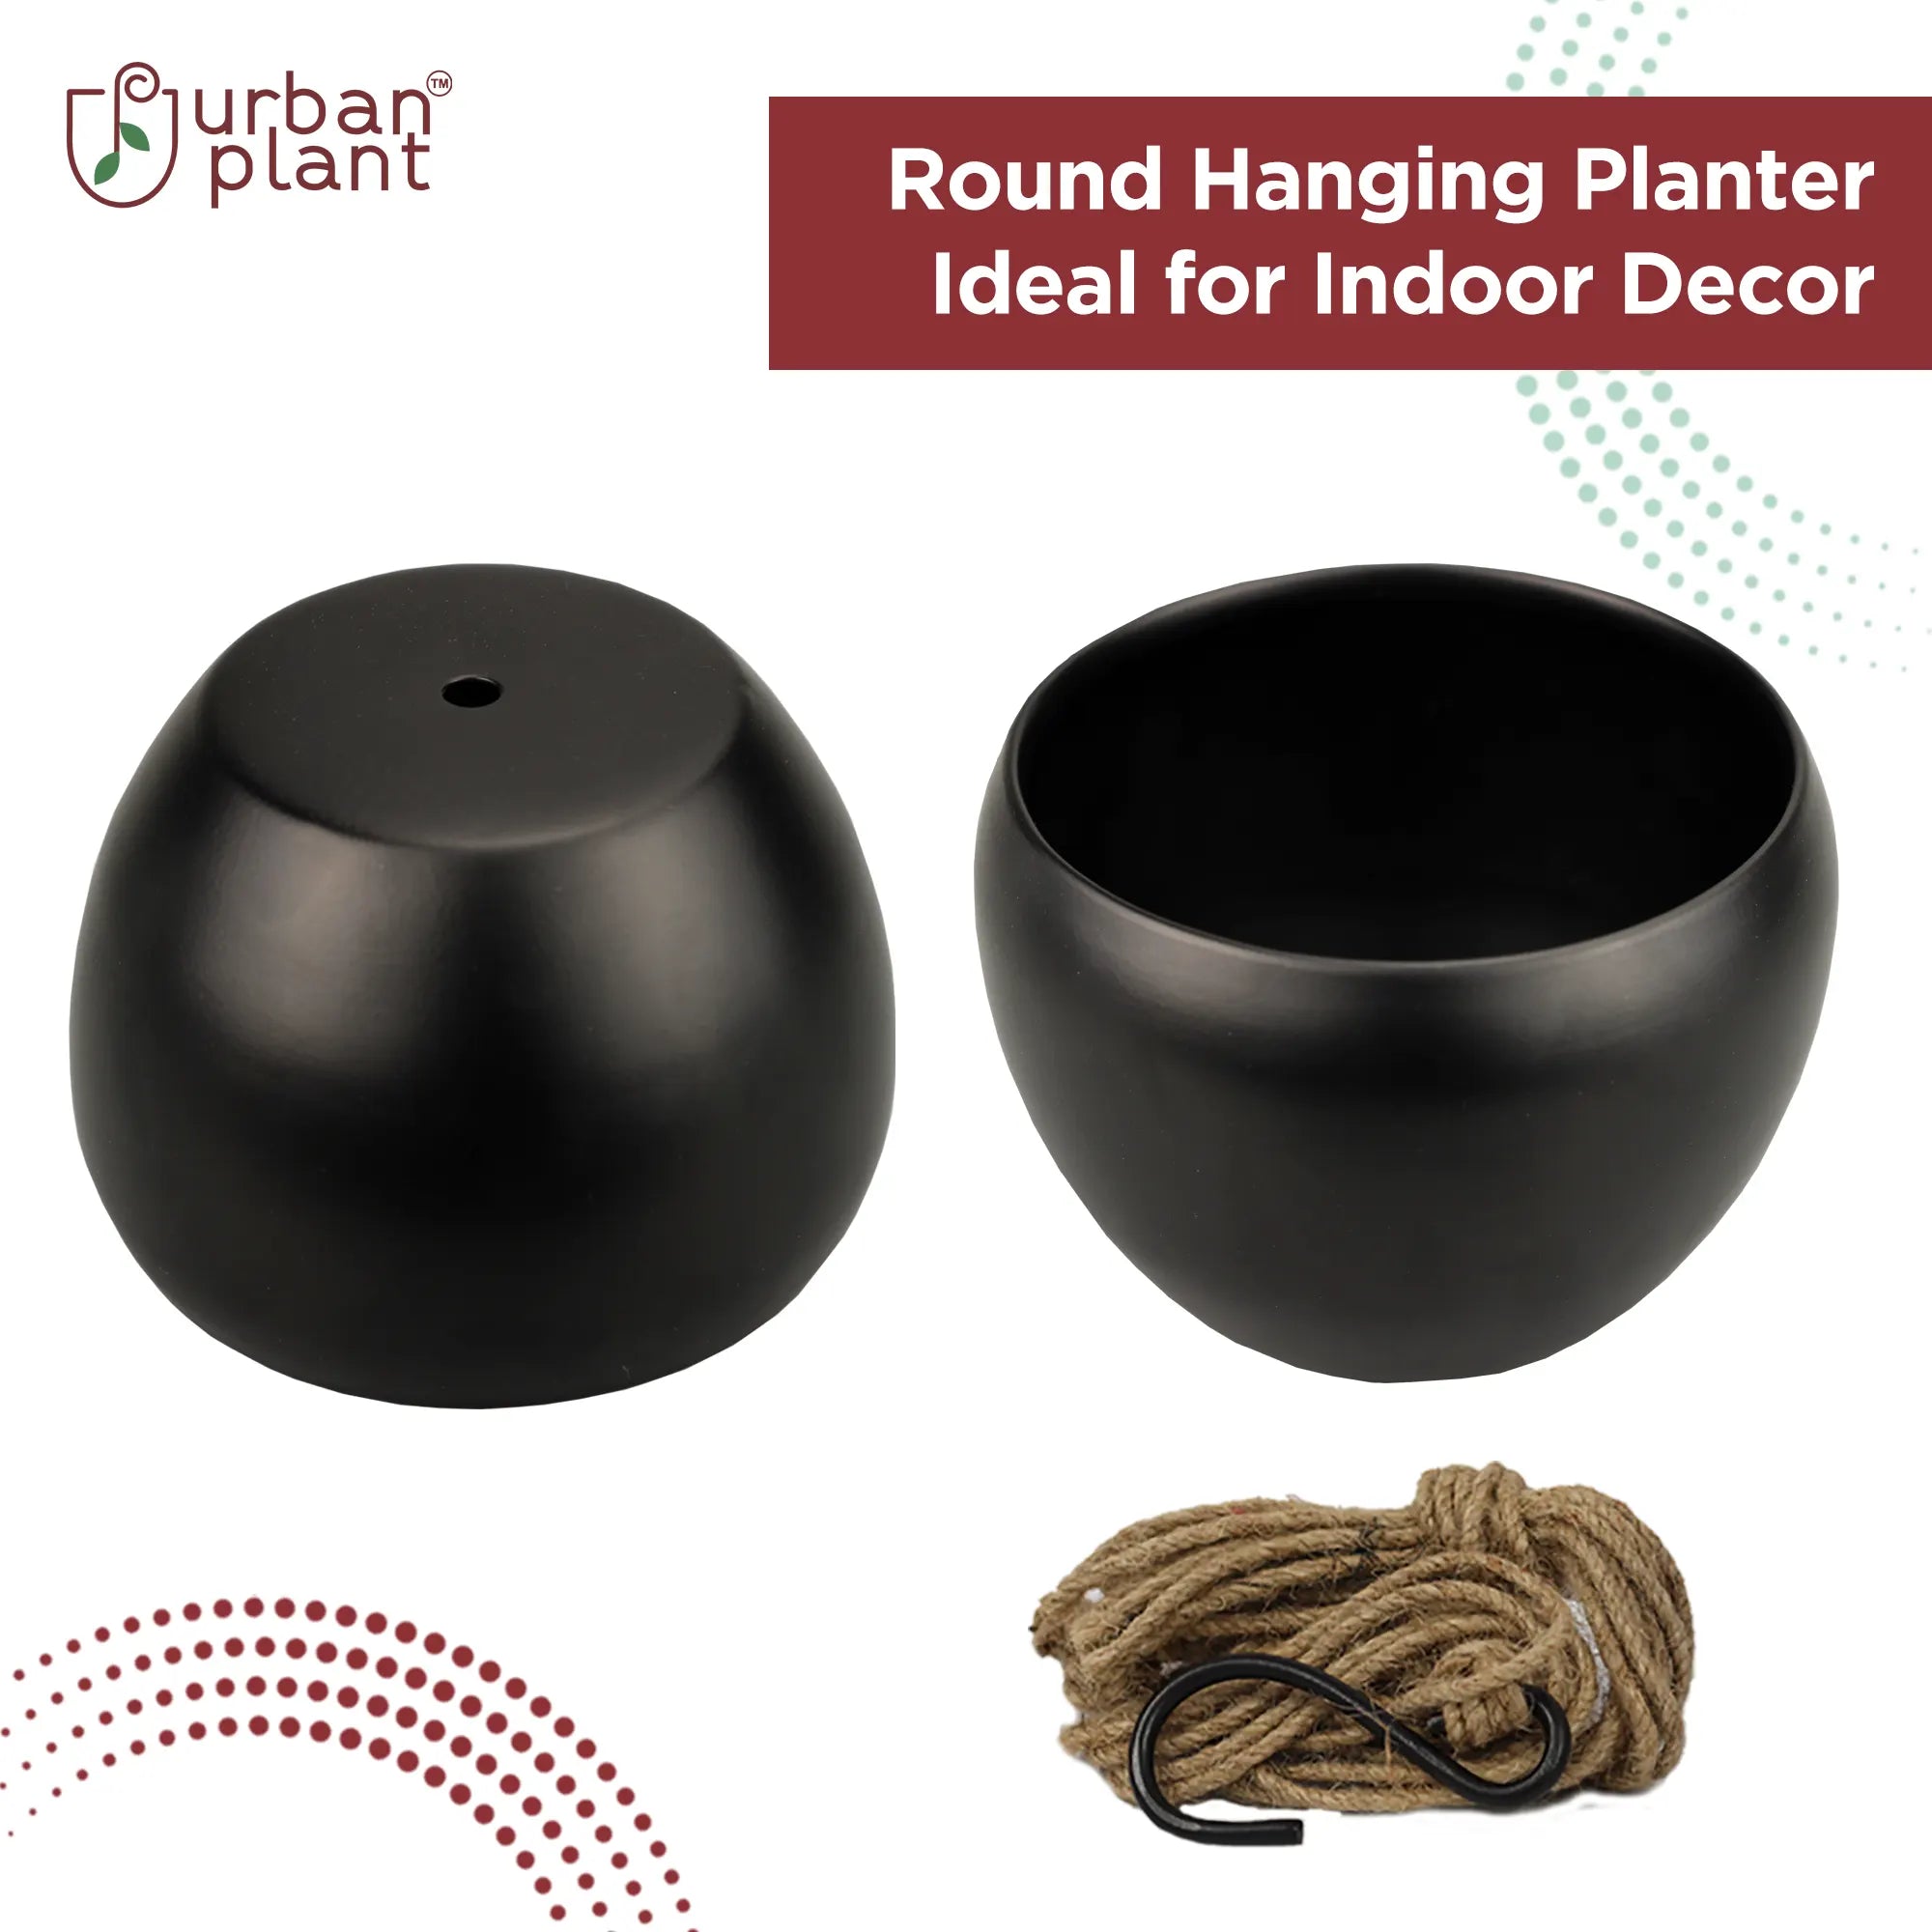 Buy Hanging Planter Online with Natural Jute Rope, S Hook- Urban Plant